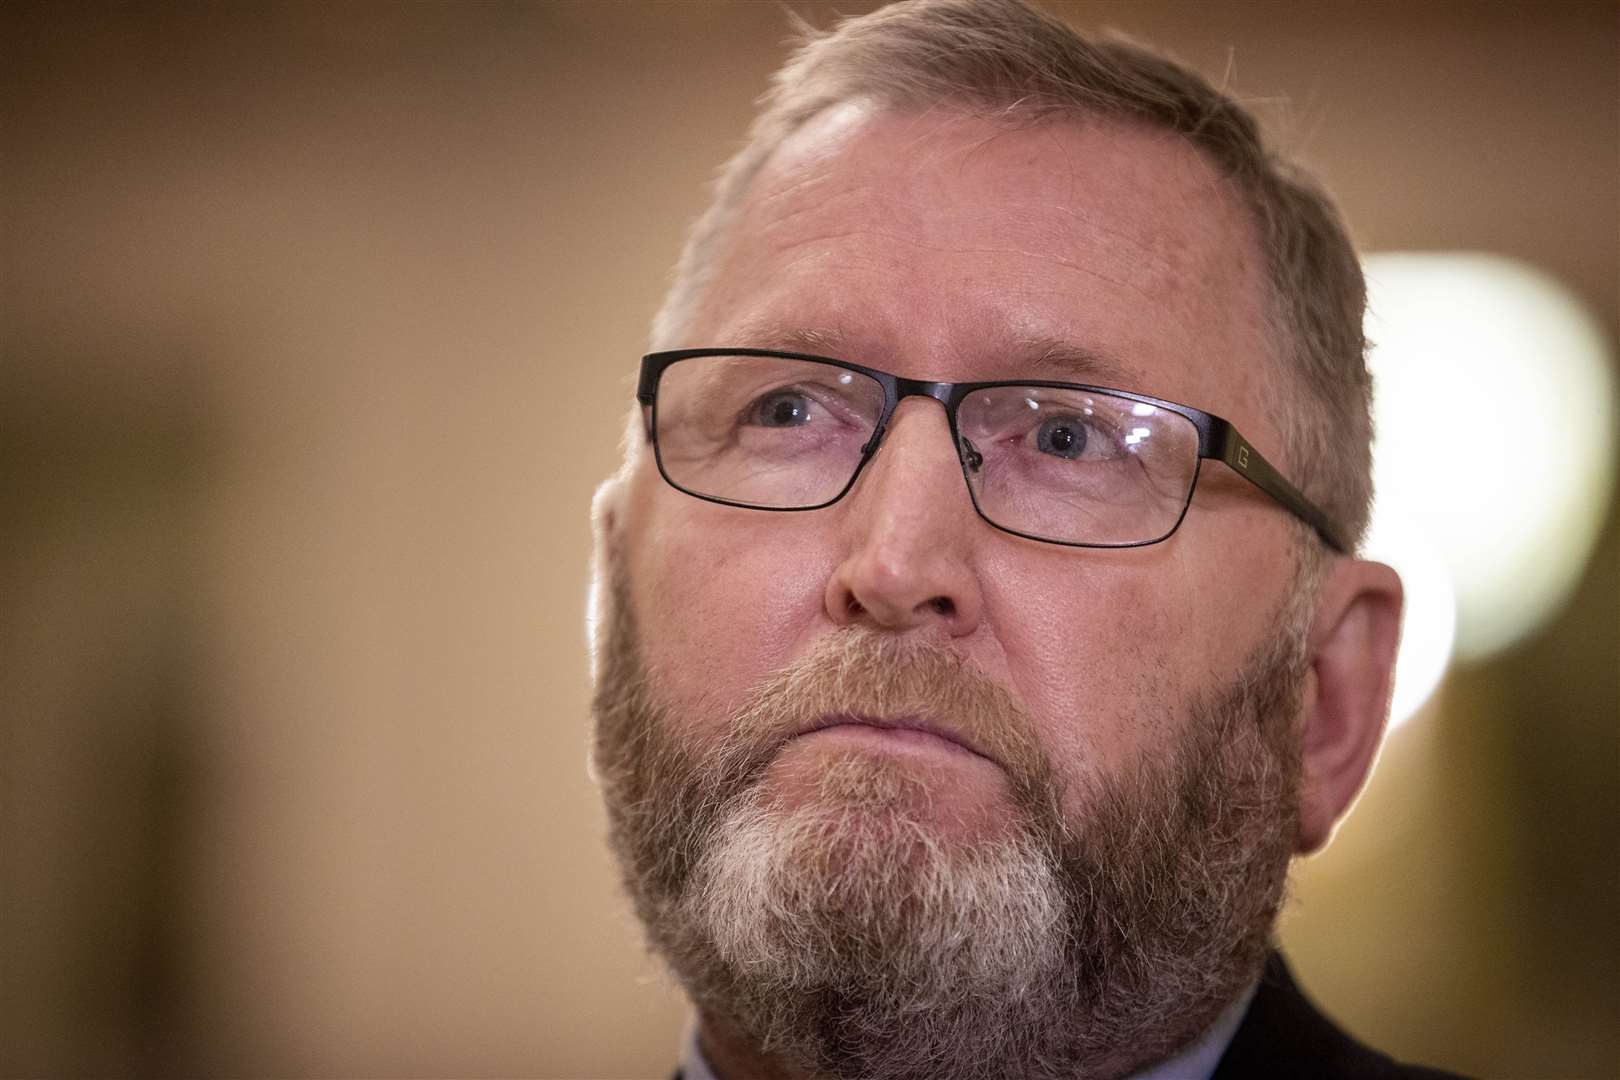 UUP leader Doug Beattie accused the Government of giving a ‘leg up’ to the DUP (Liam McBurney/PA)